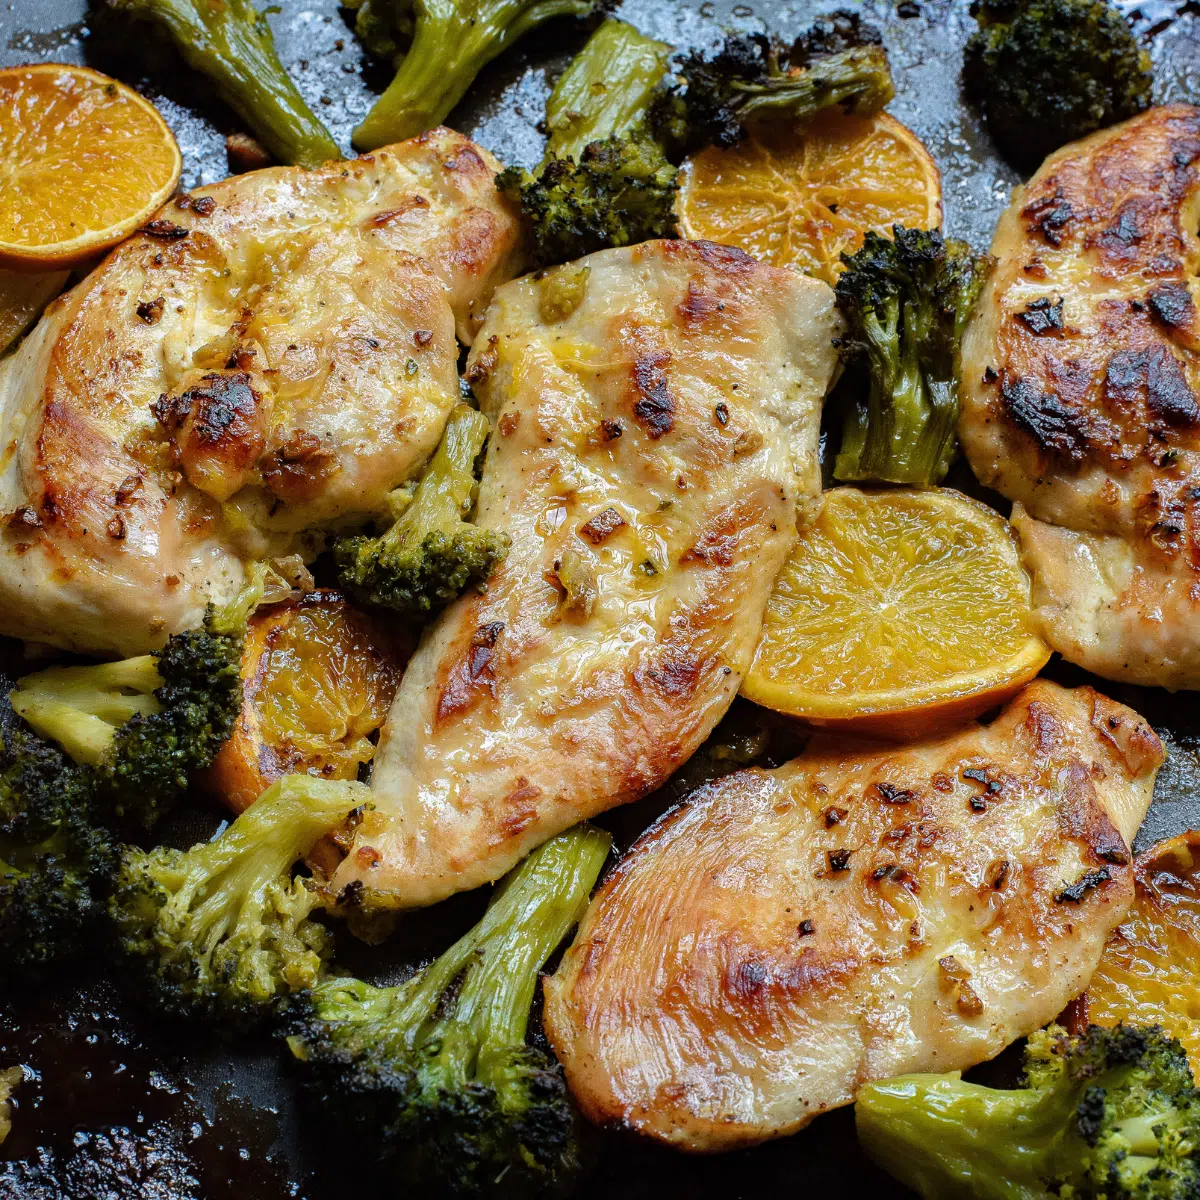 Sheet Pan Chicken with Broccoli and Sliced Oranges